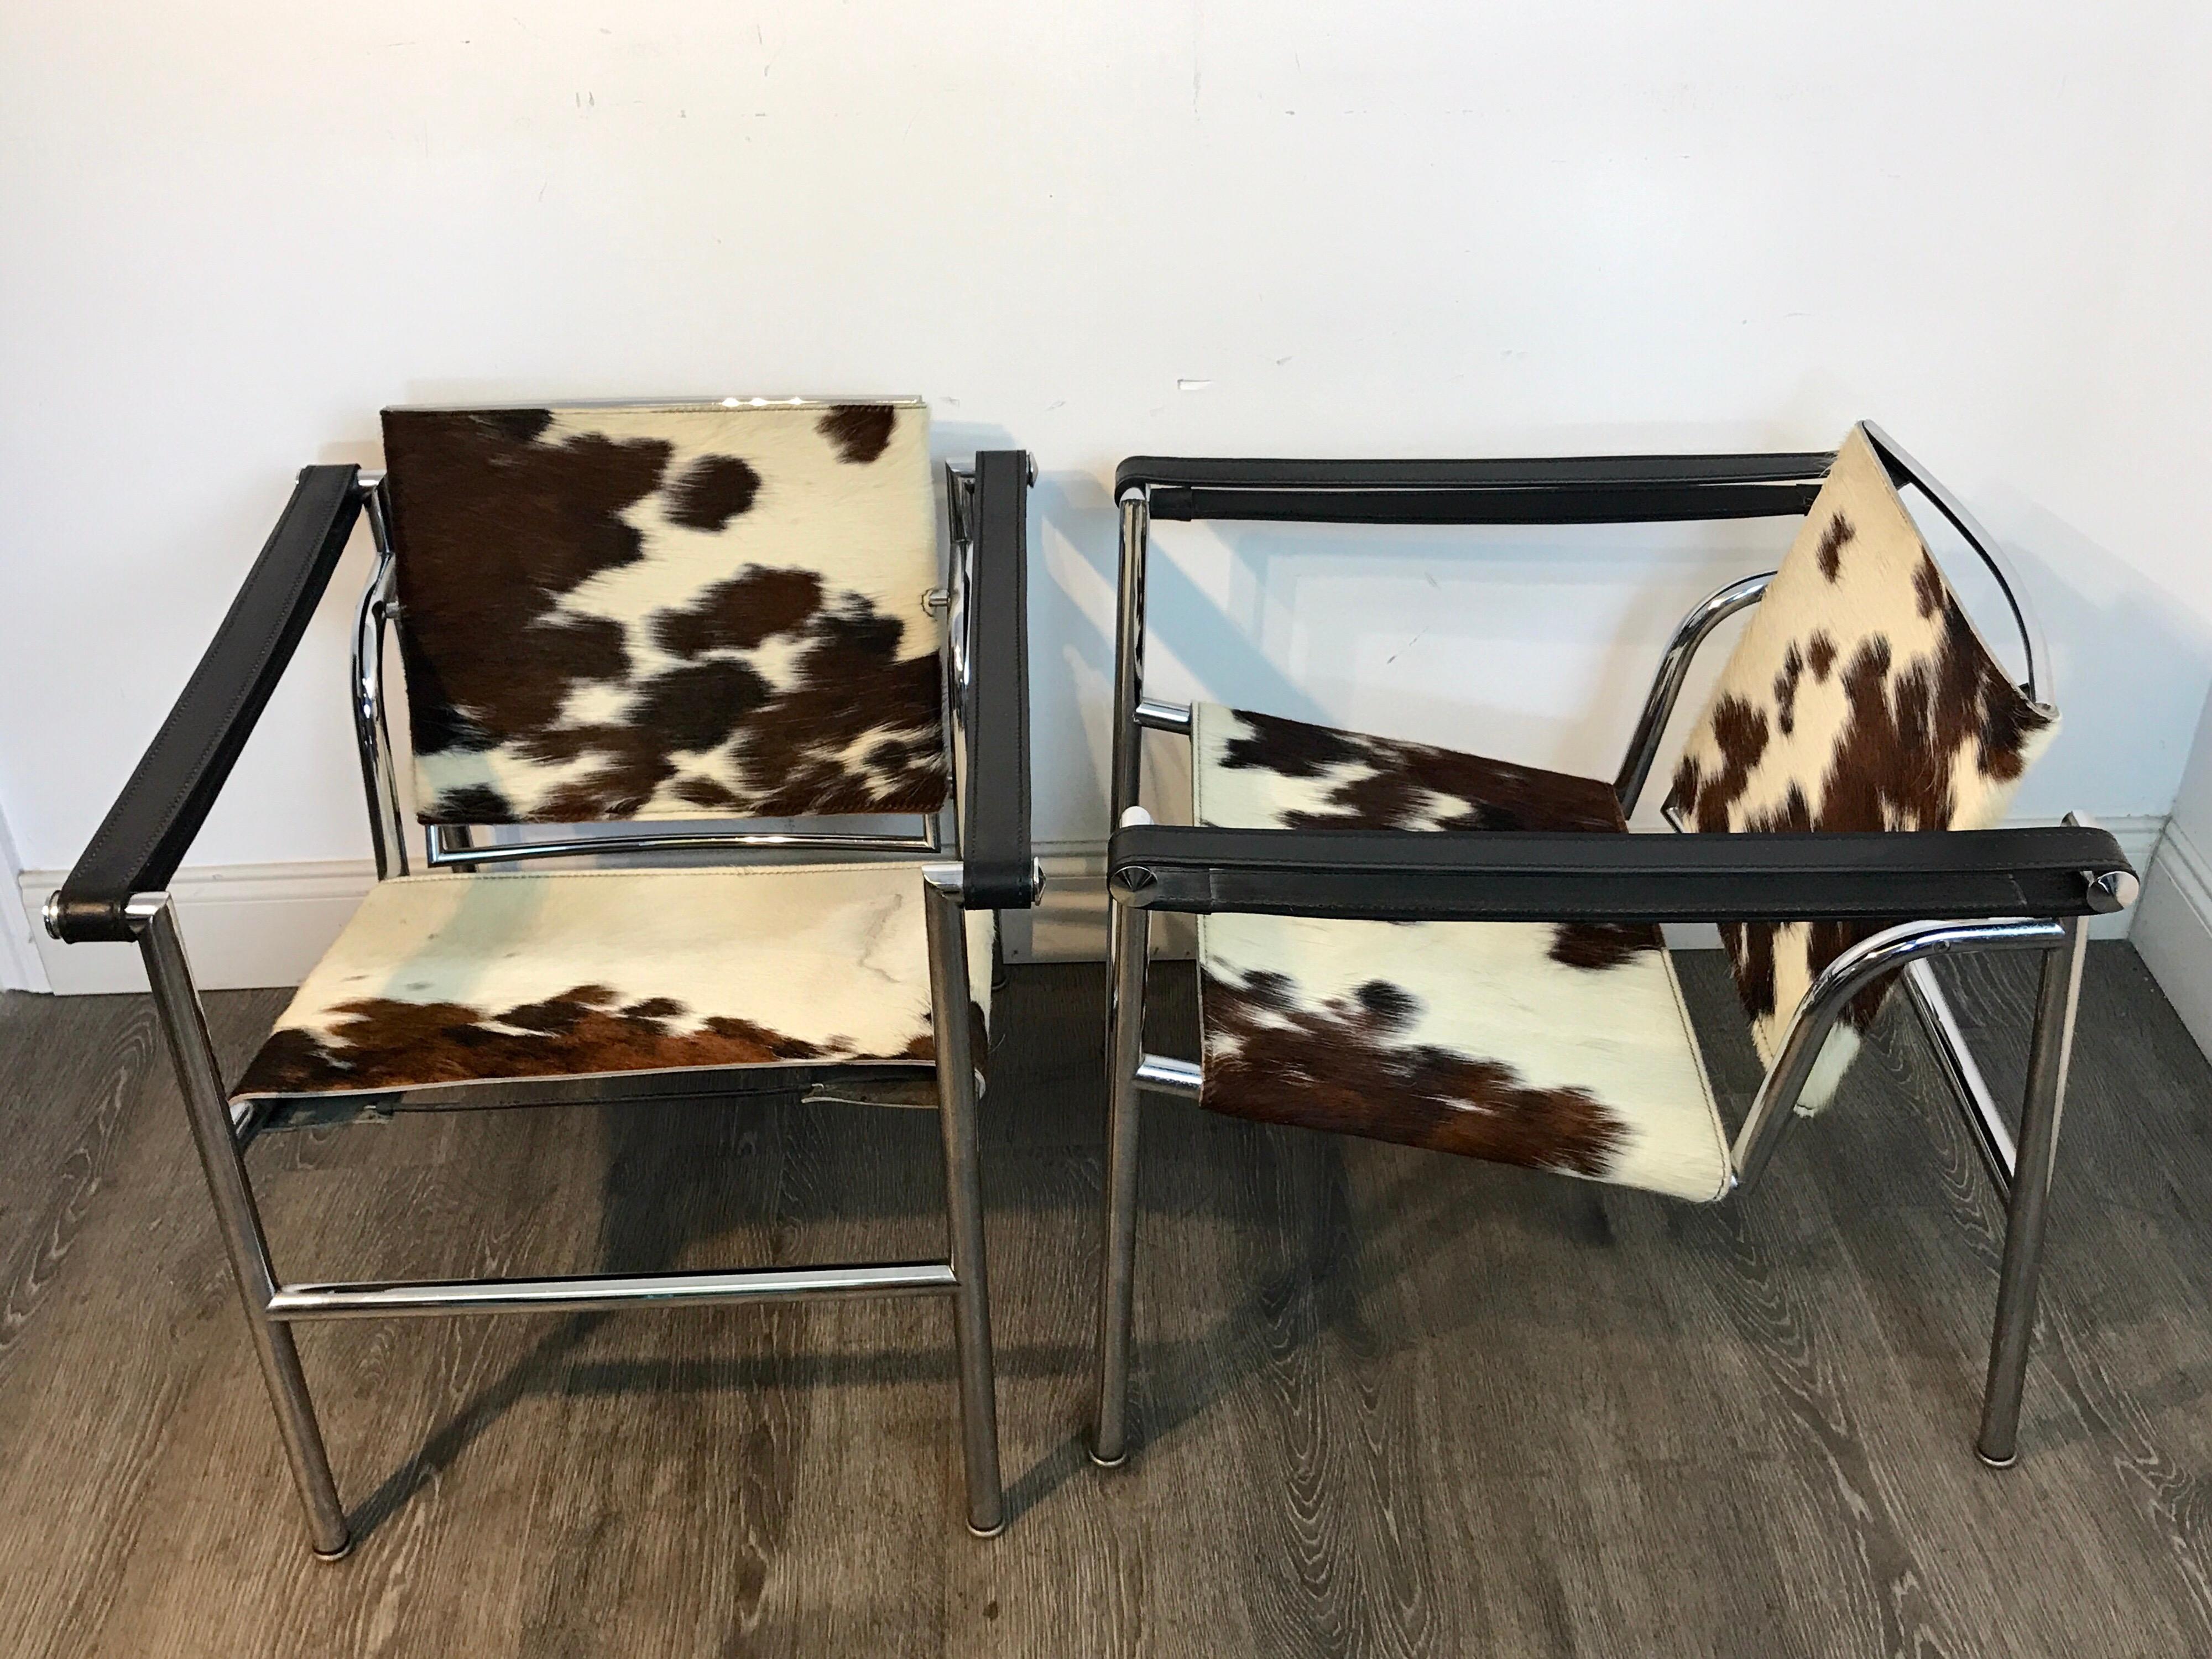 Pair of LC1 sling chairs in Cowhide, by Cassina
Each chair stamped 